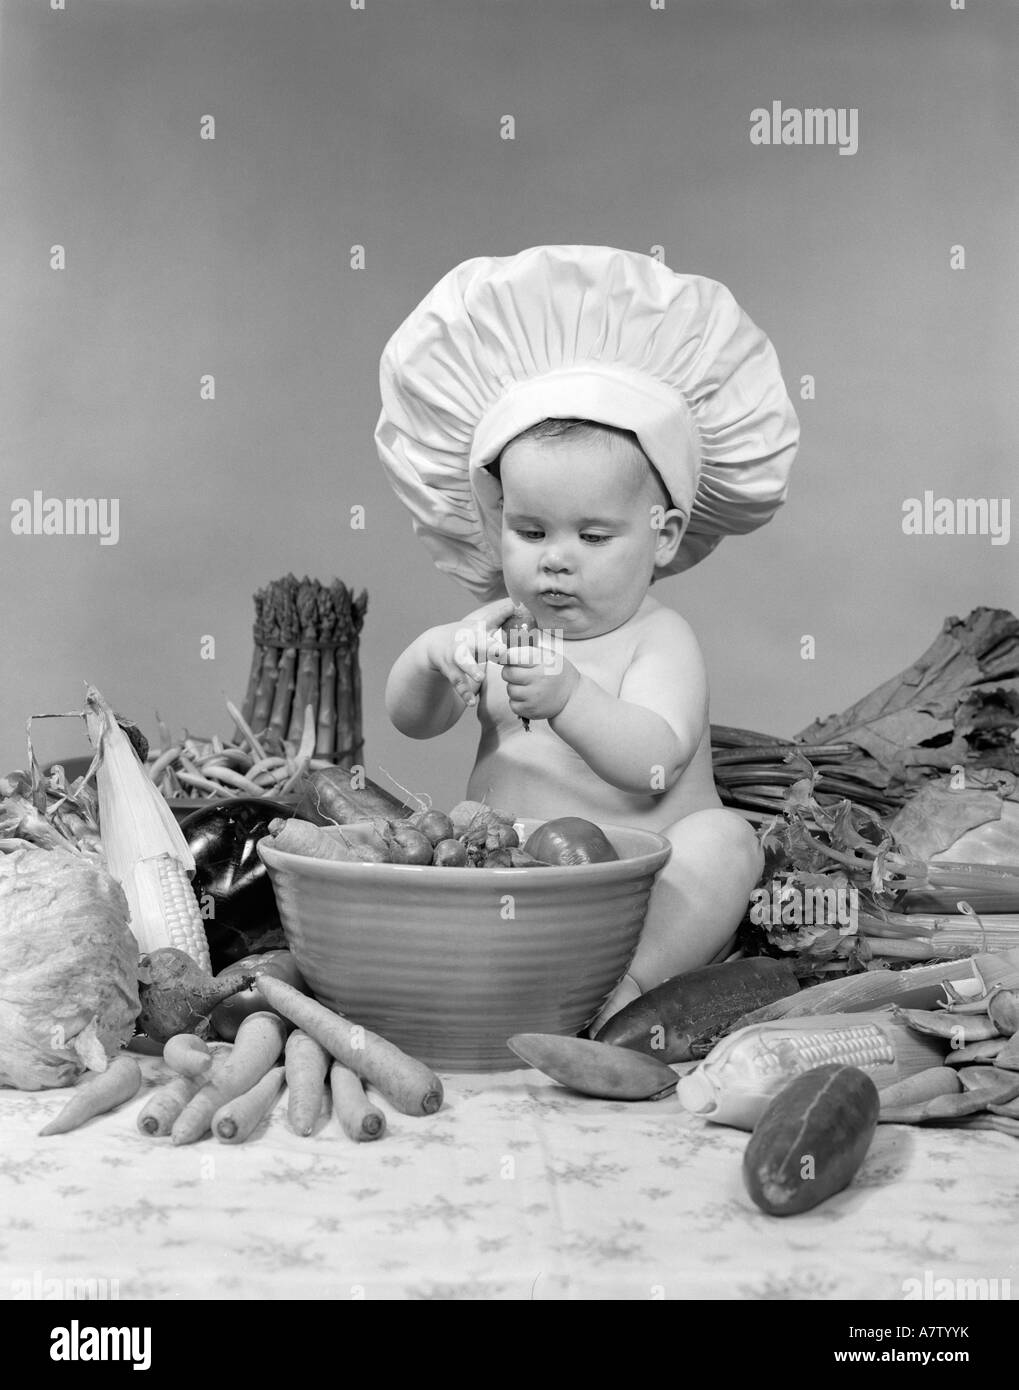 1950s 1960s BABY WEARING CHEF HAT TOQUE BOWL AND RAW VEGETABLES MAKING A SALAD Stock Photo